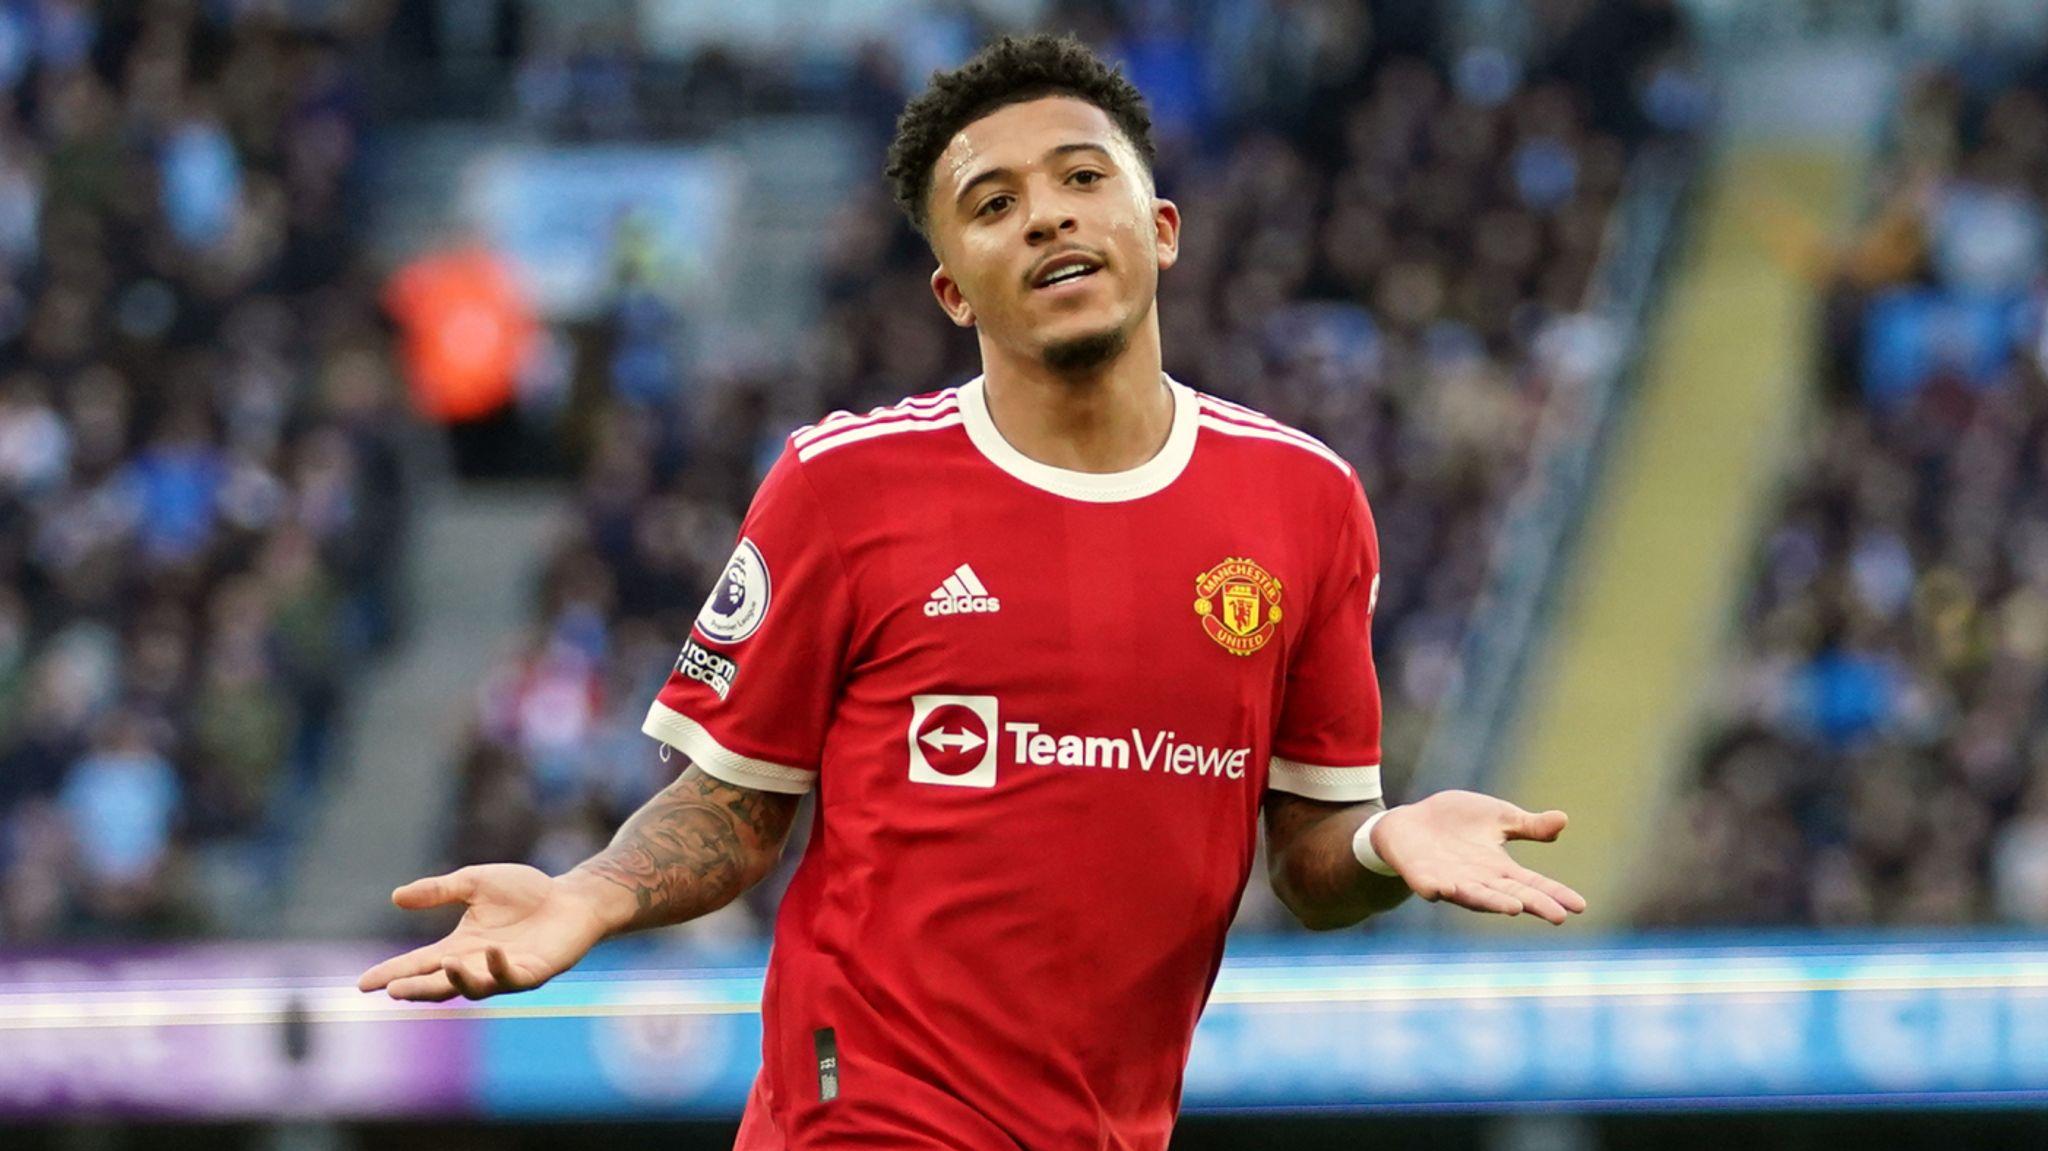 Jadon Sancho Approaching Best Manchester United Form Says Ralf